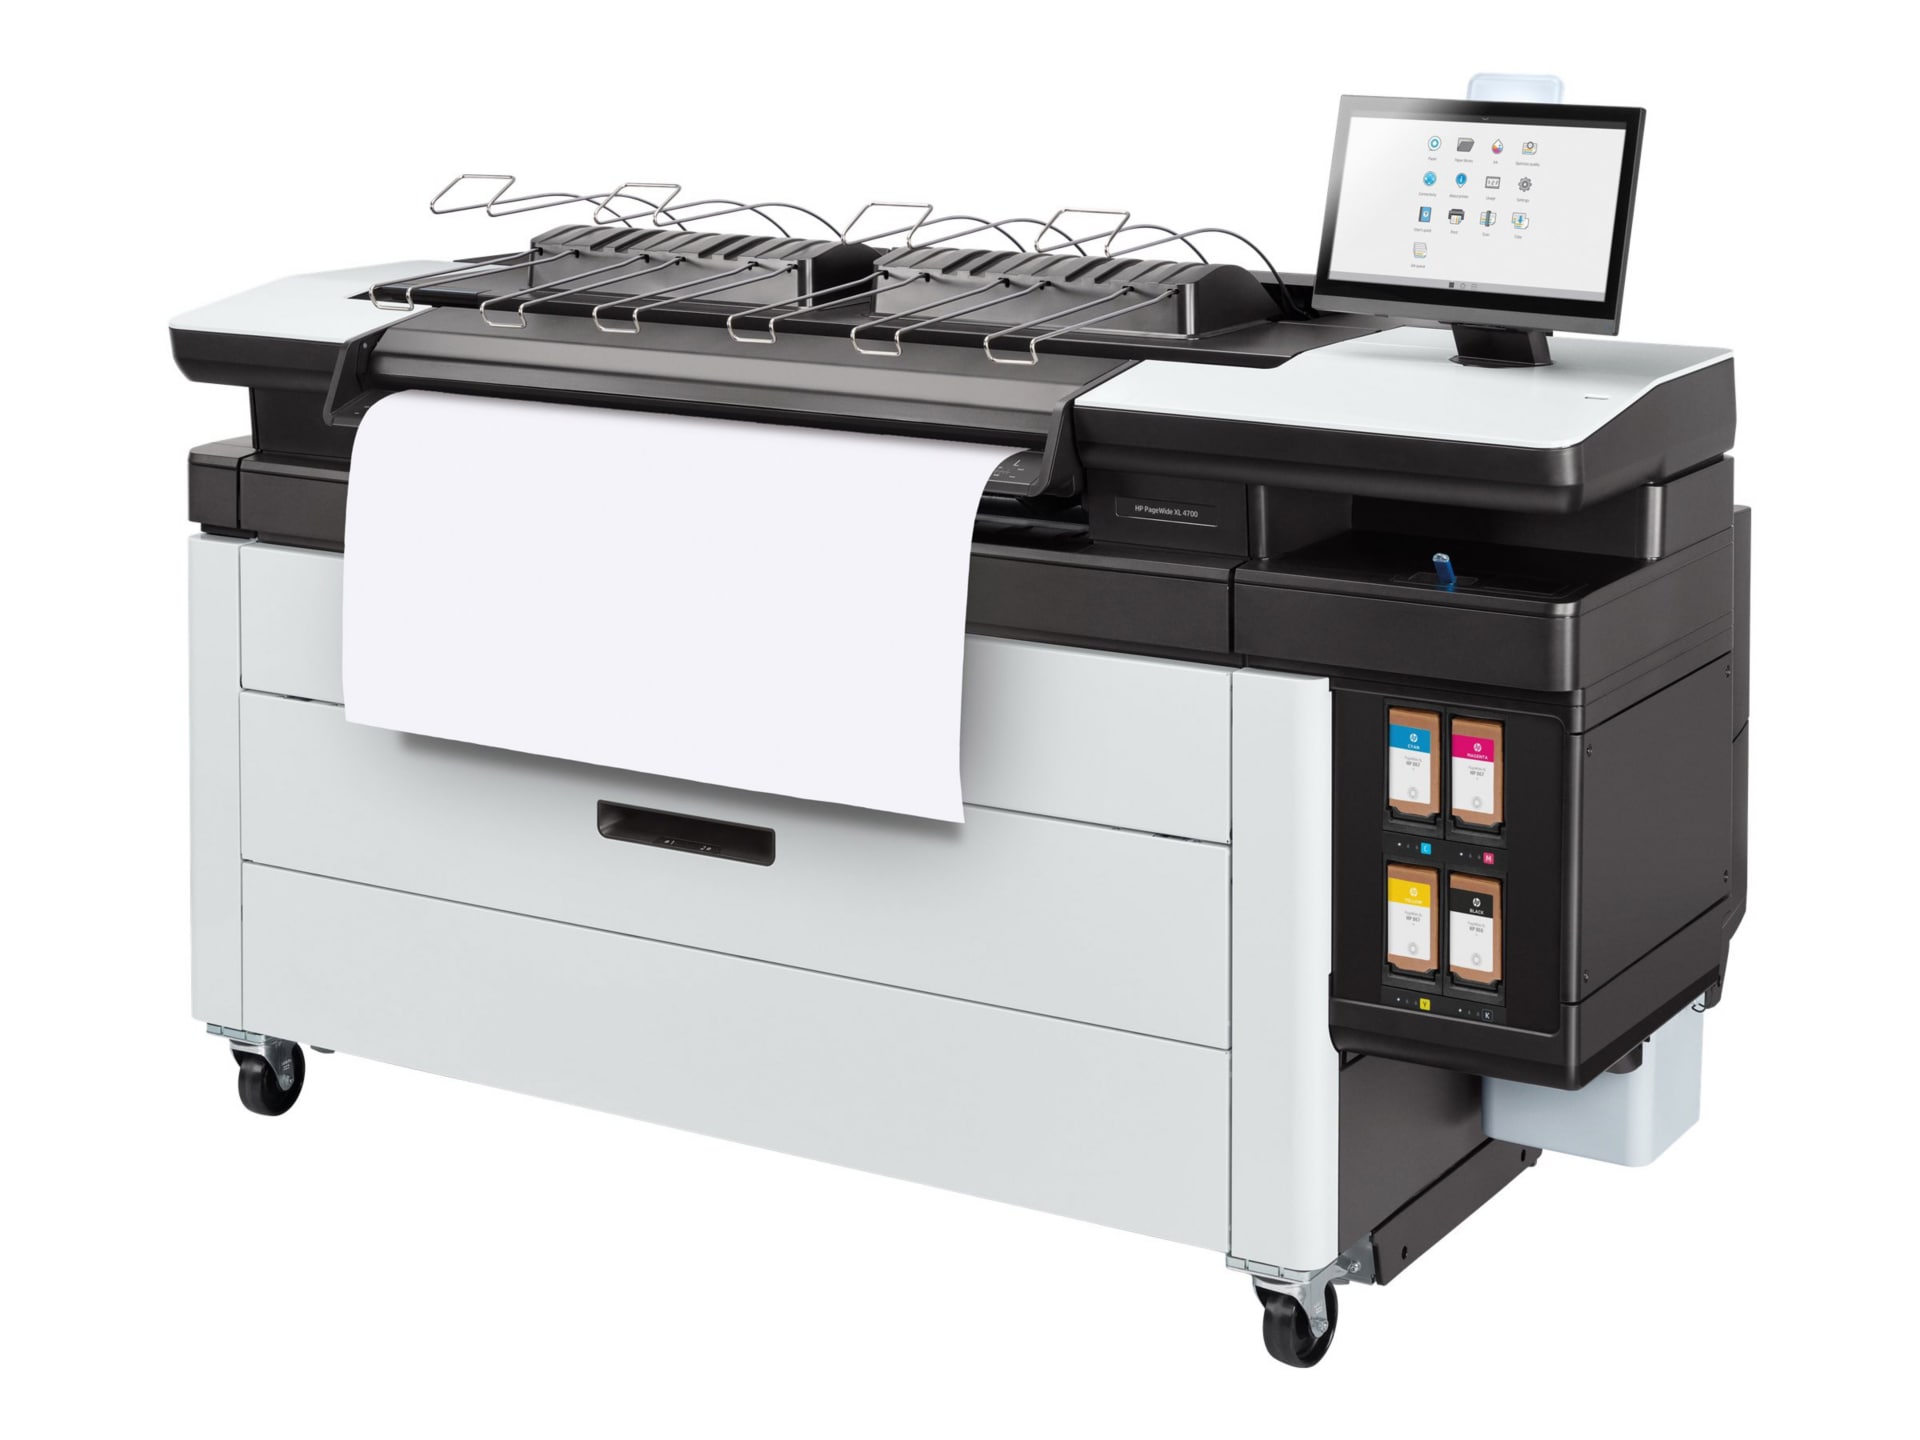 HP PageWide XL 4700 - large-format printer - color - page wide array